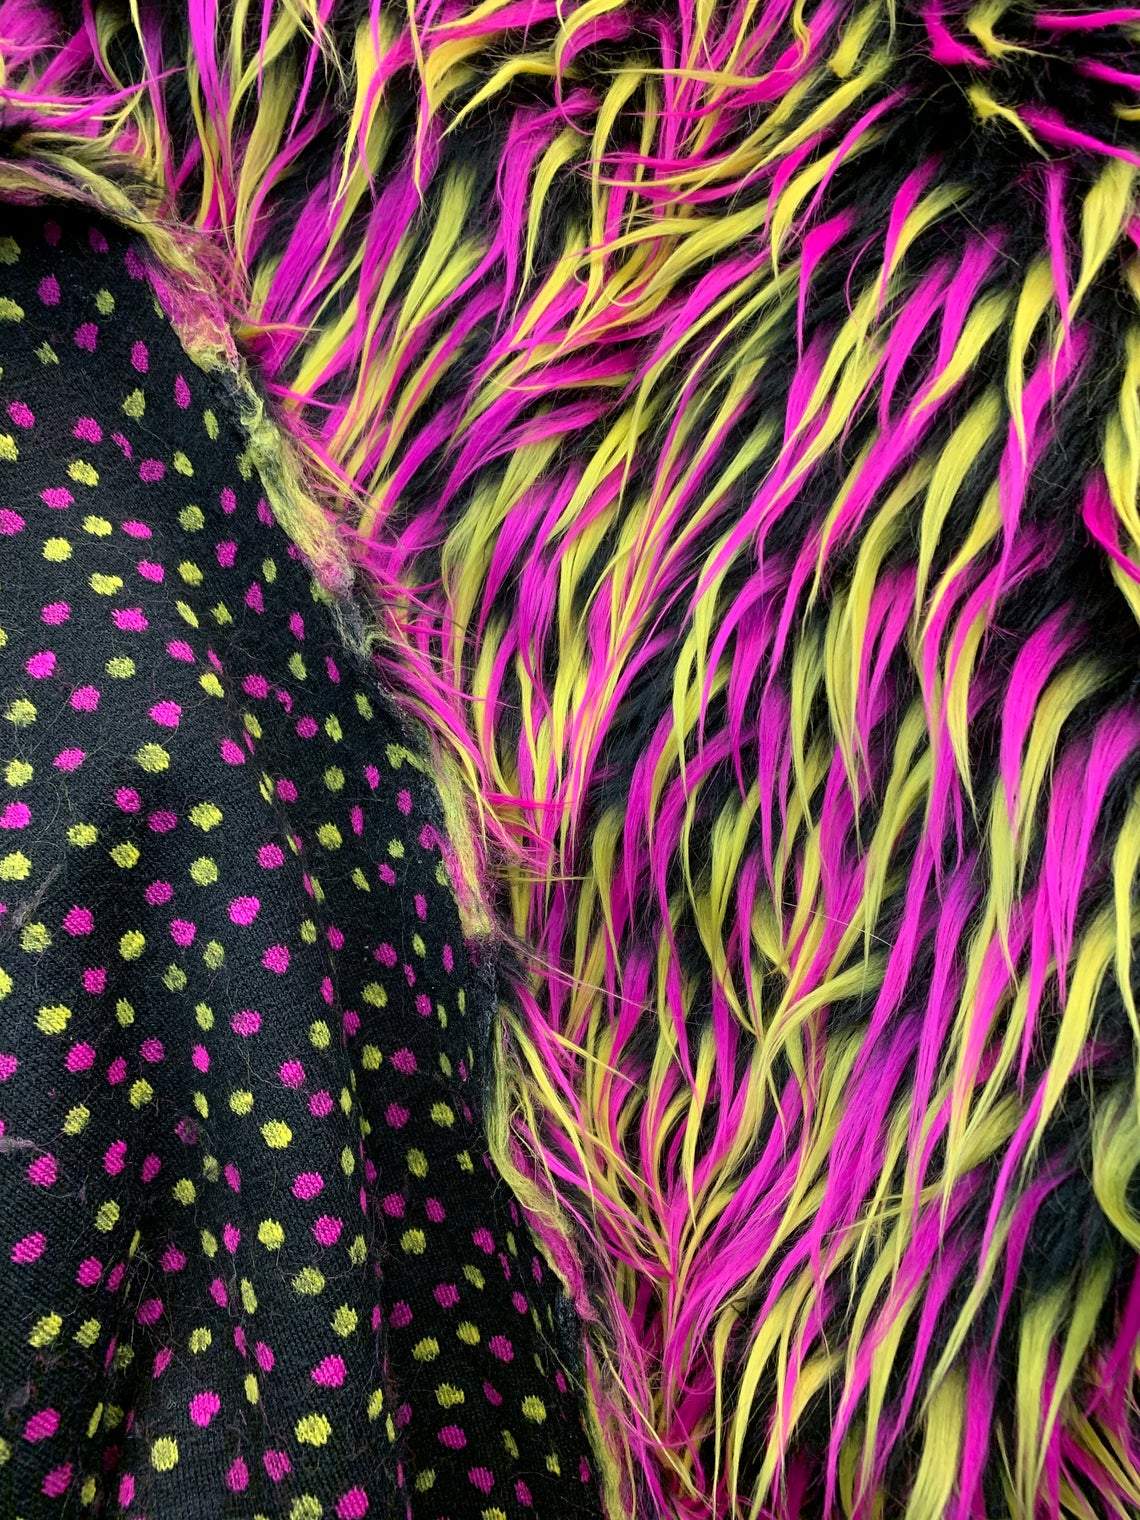 Yellow, Hot Pink, and Black Faux Fur Fabric By The Yard 3 Tone Fashion Fabric MaterialICE FABRICSICE FABRICSBy The Yard (60 inches Wide)Yellow, Hot Pink, and Black Faux Fur Fabric By The Yard 3 Tone Fashion Fabric Material ICE FABRICS